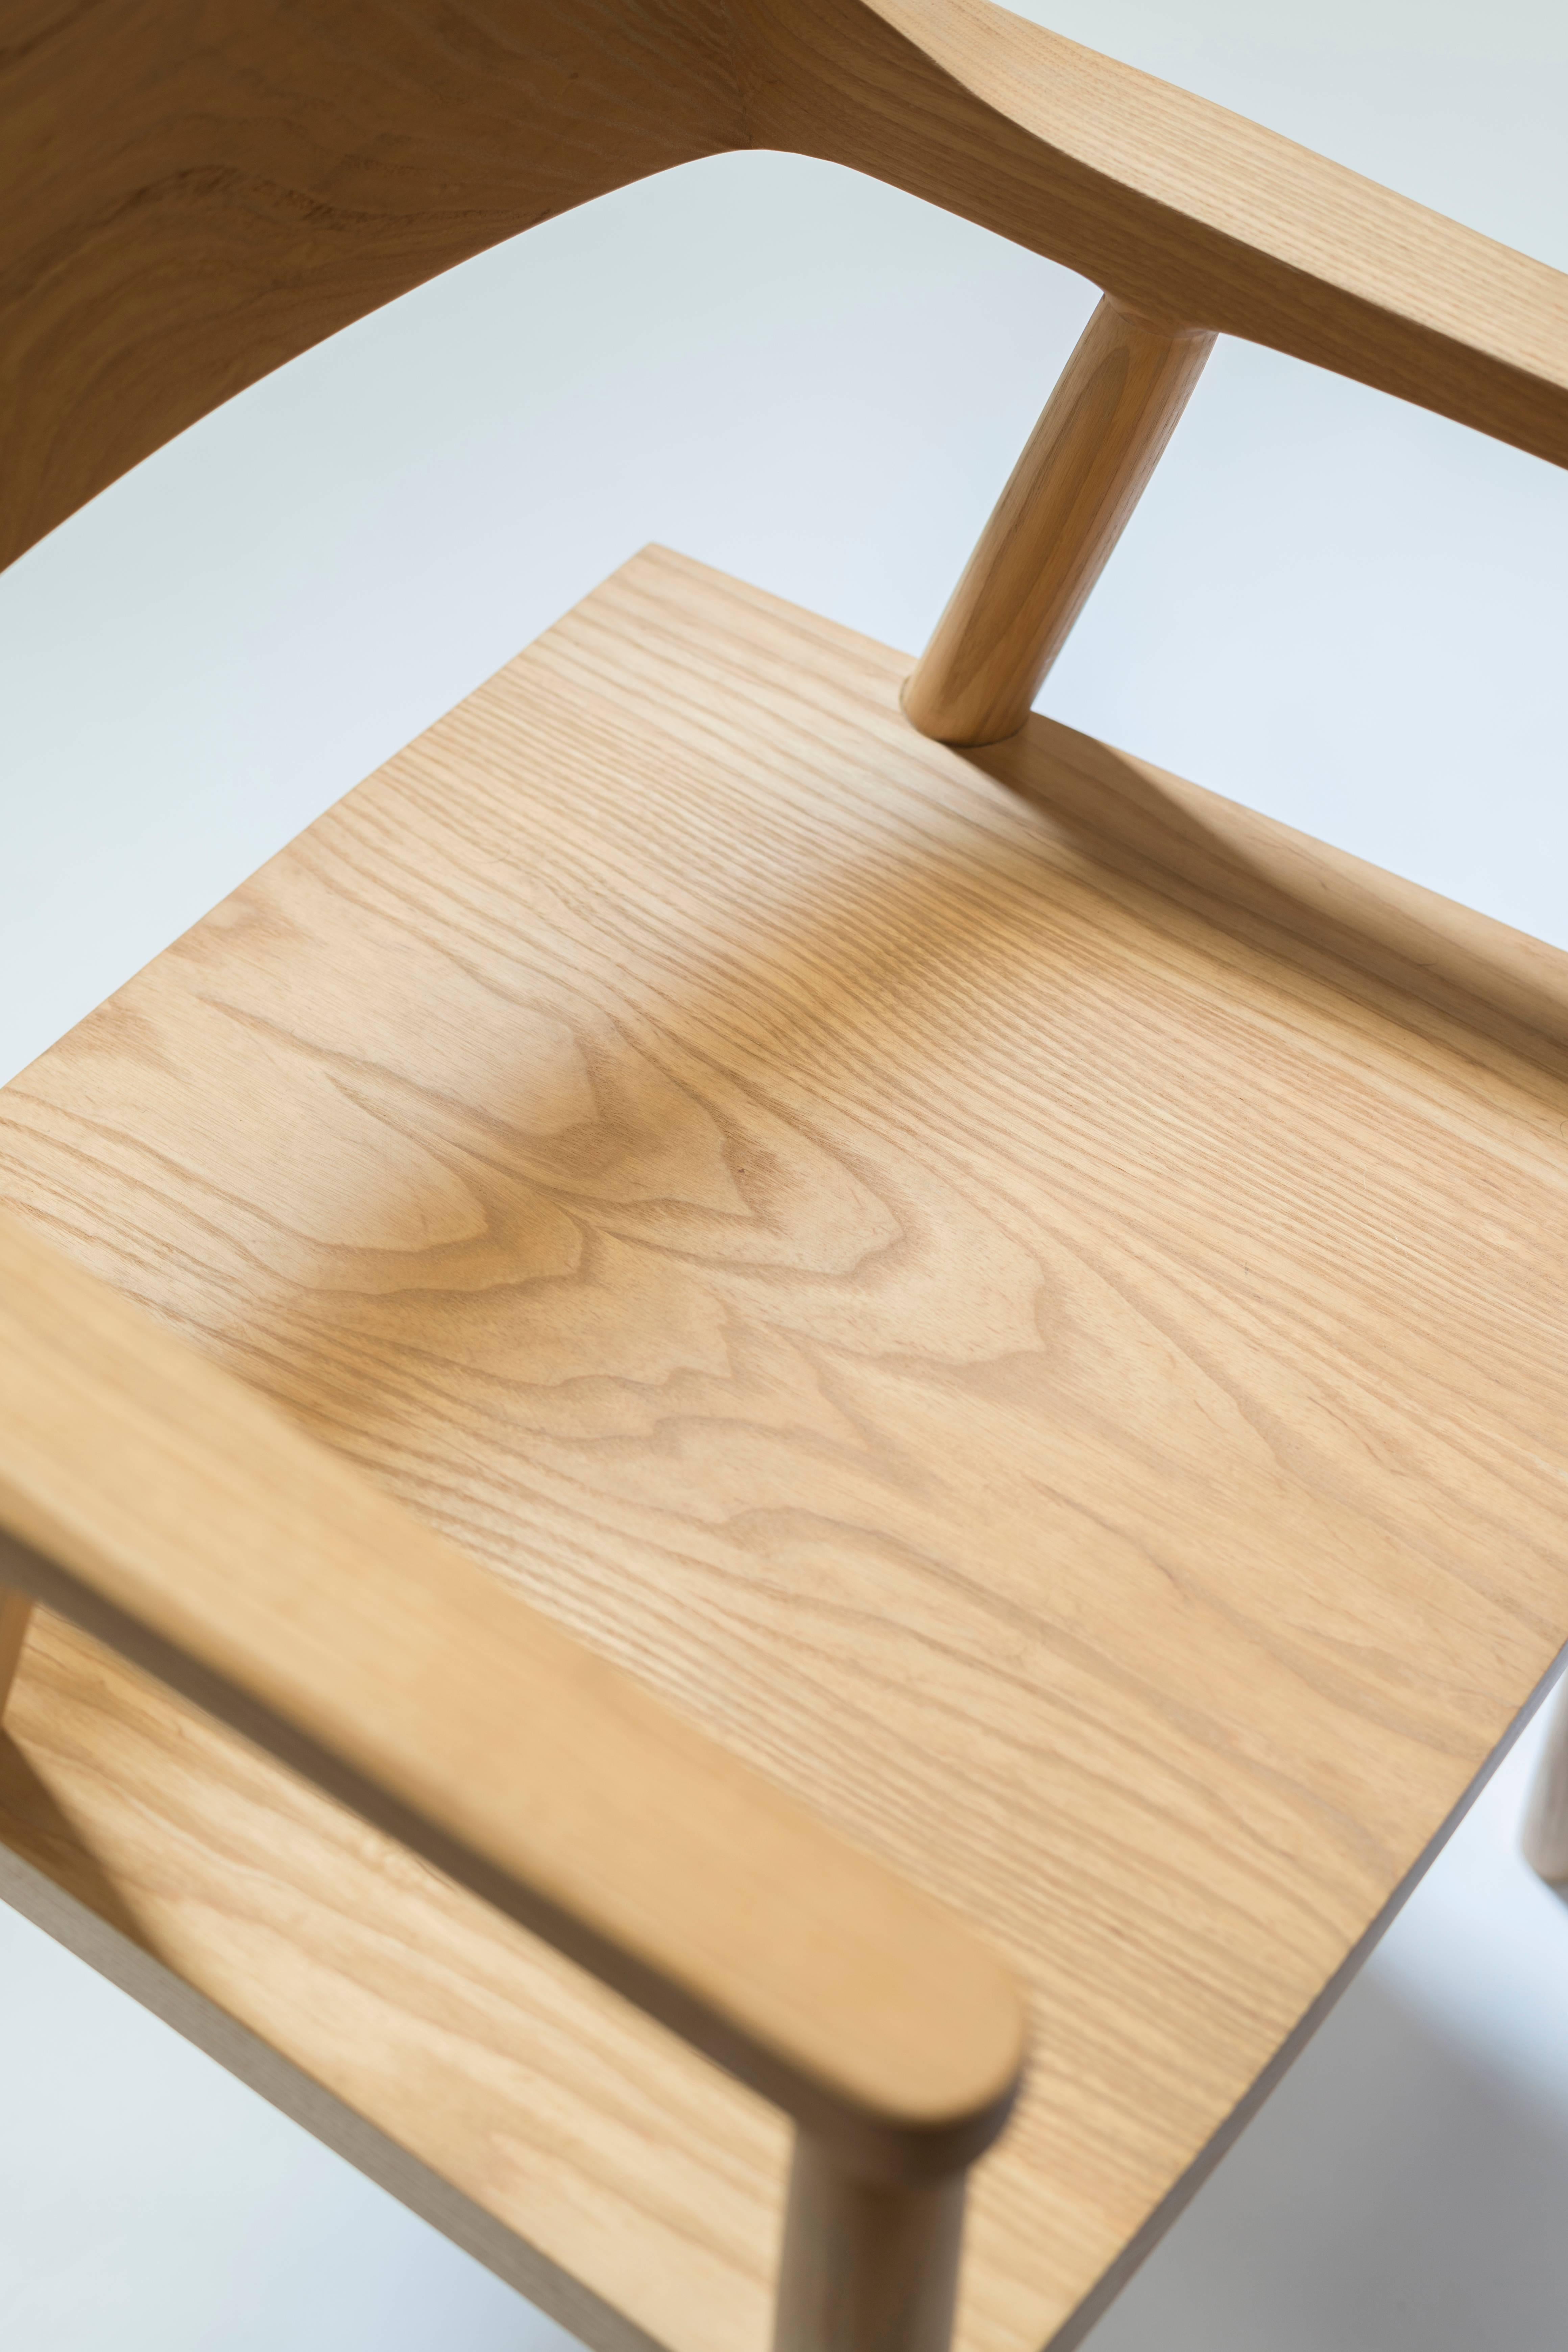 Tønder has its roots in Danish modernism It’s form hints at Hans Wagner’s “the Chair”. I have married both traditional chair-making techniques such as shaping with a spokeshave to create the fluid compound curves and modern joinery techniques that